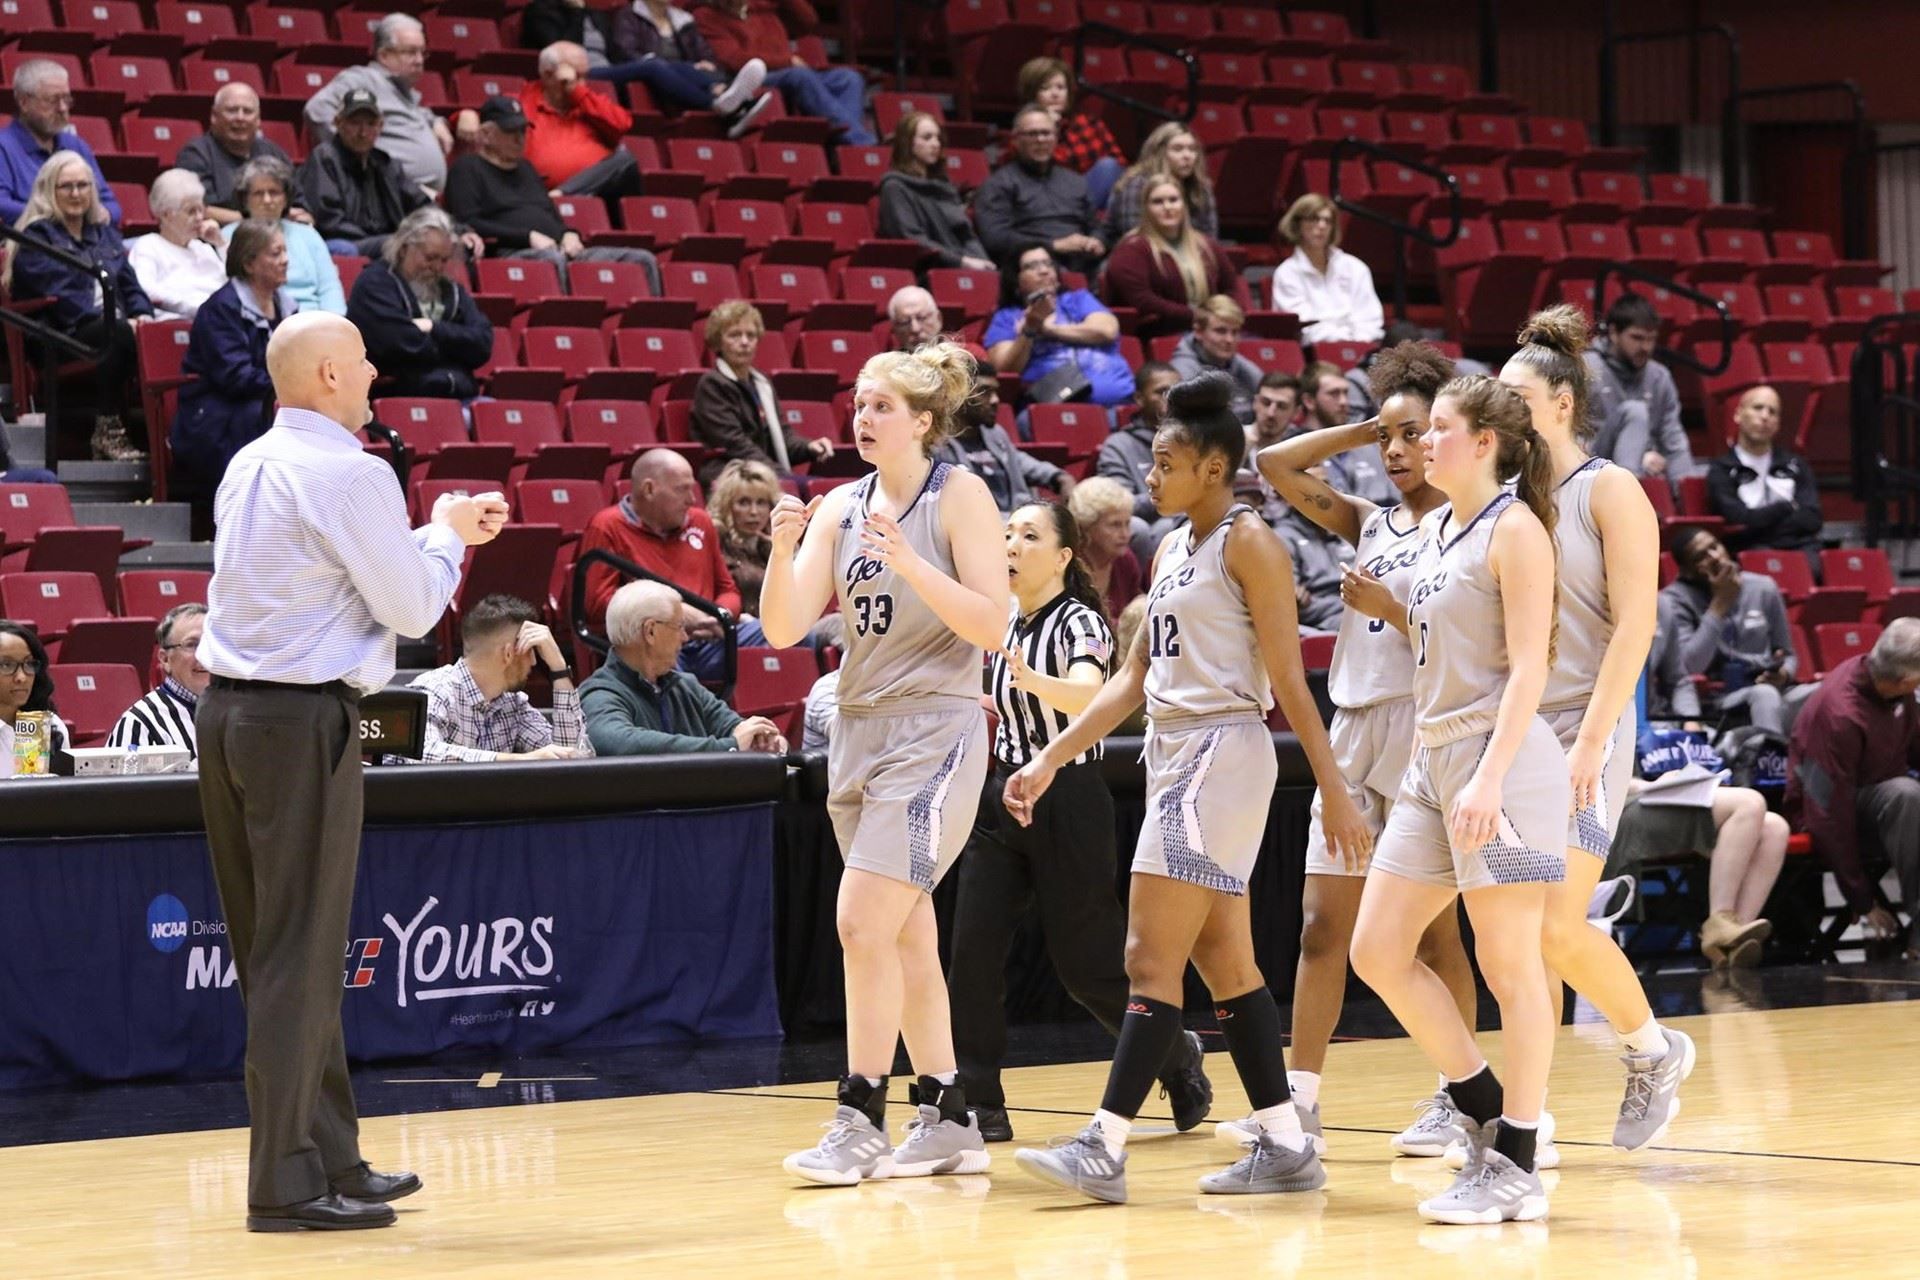 Men’s, women’s basketball comes to an end